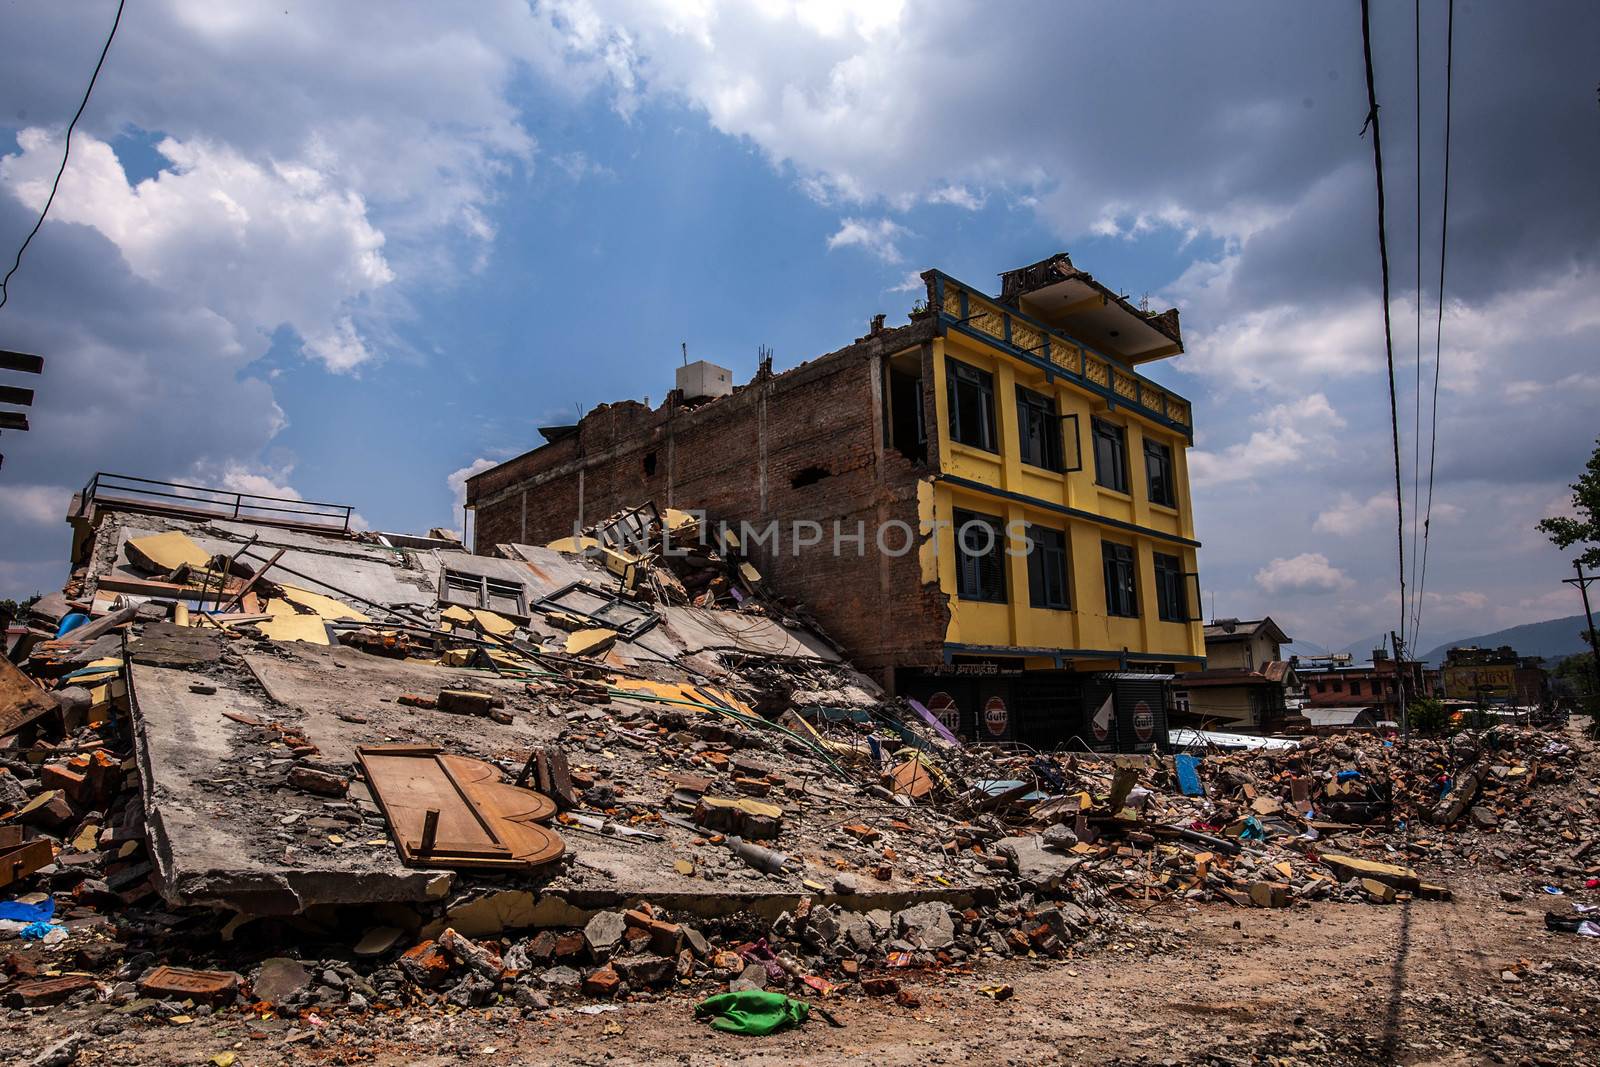 NEPAL,Kathmandu: Rubble and demolished buildings still cover parts of Kathmandu, Nepal on May 13, 2015, after a magnitude 7.8 earthquake hit the area.More than 8,000 people died in the quake and some 3.5 million were left homeless. 